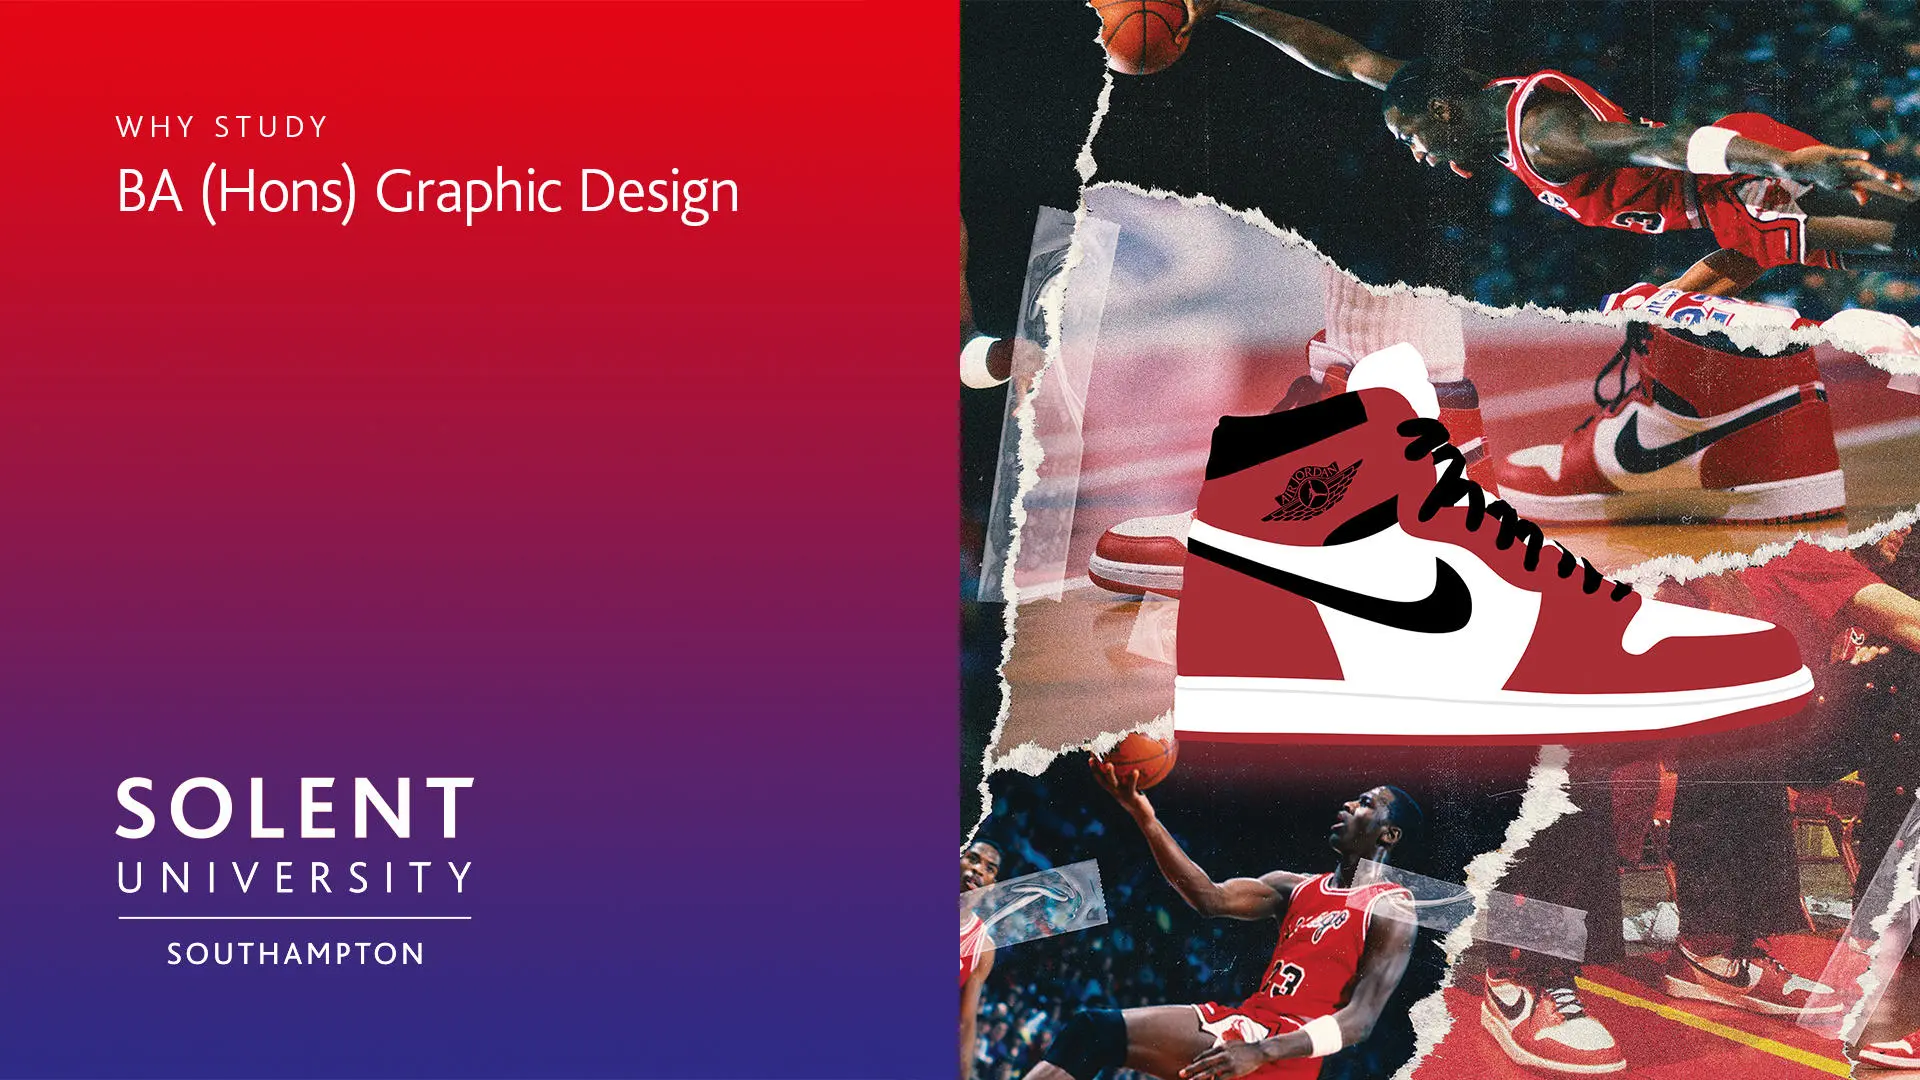 On the left of the screen is a red to purple gradient (portrait) with white copy over the top which reads 'Why study BA (Hons) Graphic Design' and the Solent University, Southampton logo bottom left. To the right is a photo of graphic design work which is a collage of basketball images and a focus on red and white Nike trainers